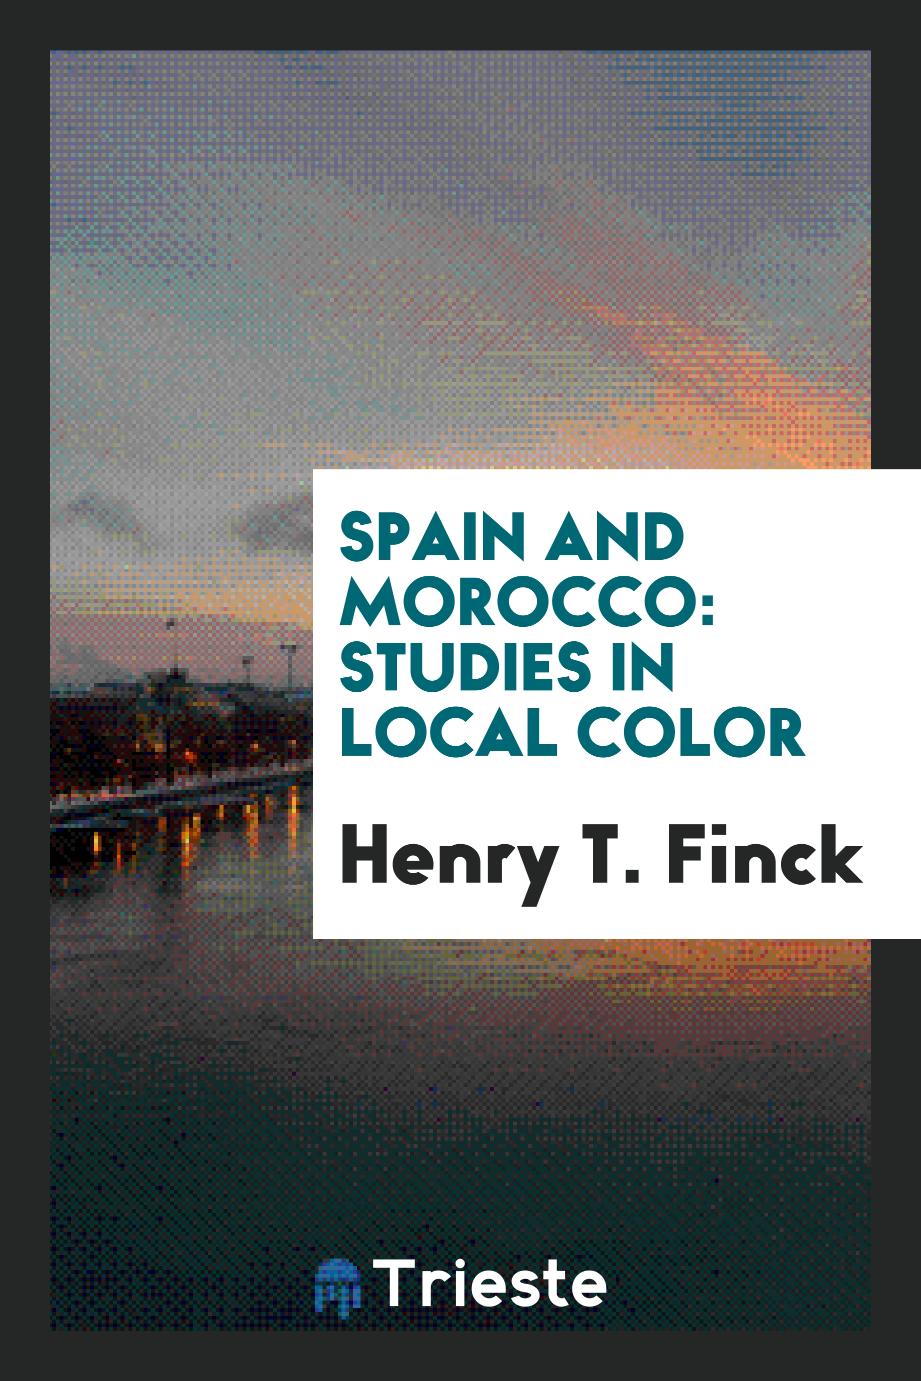 Spain and Morocco: studies in local color